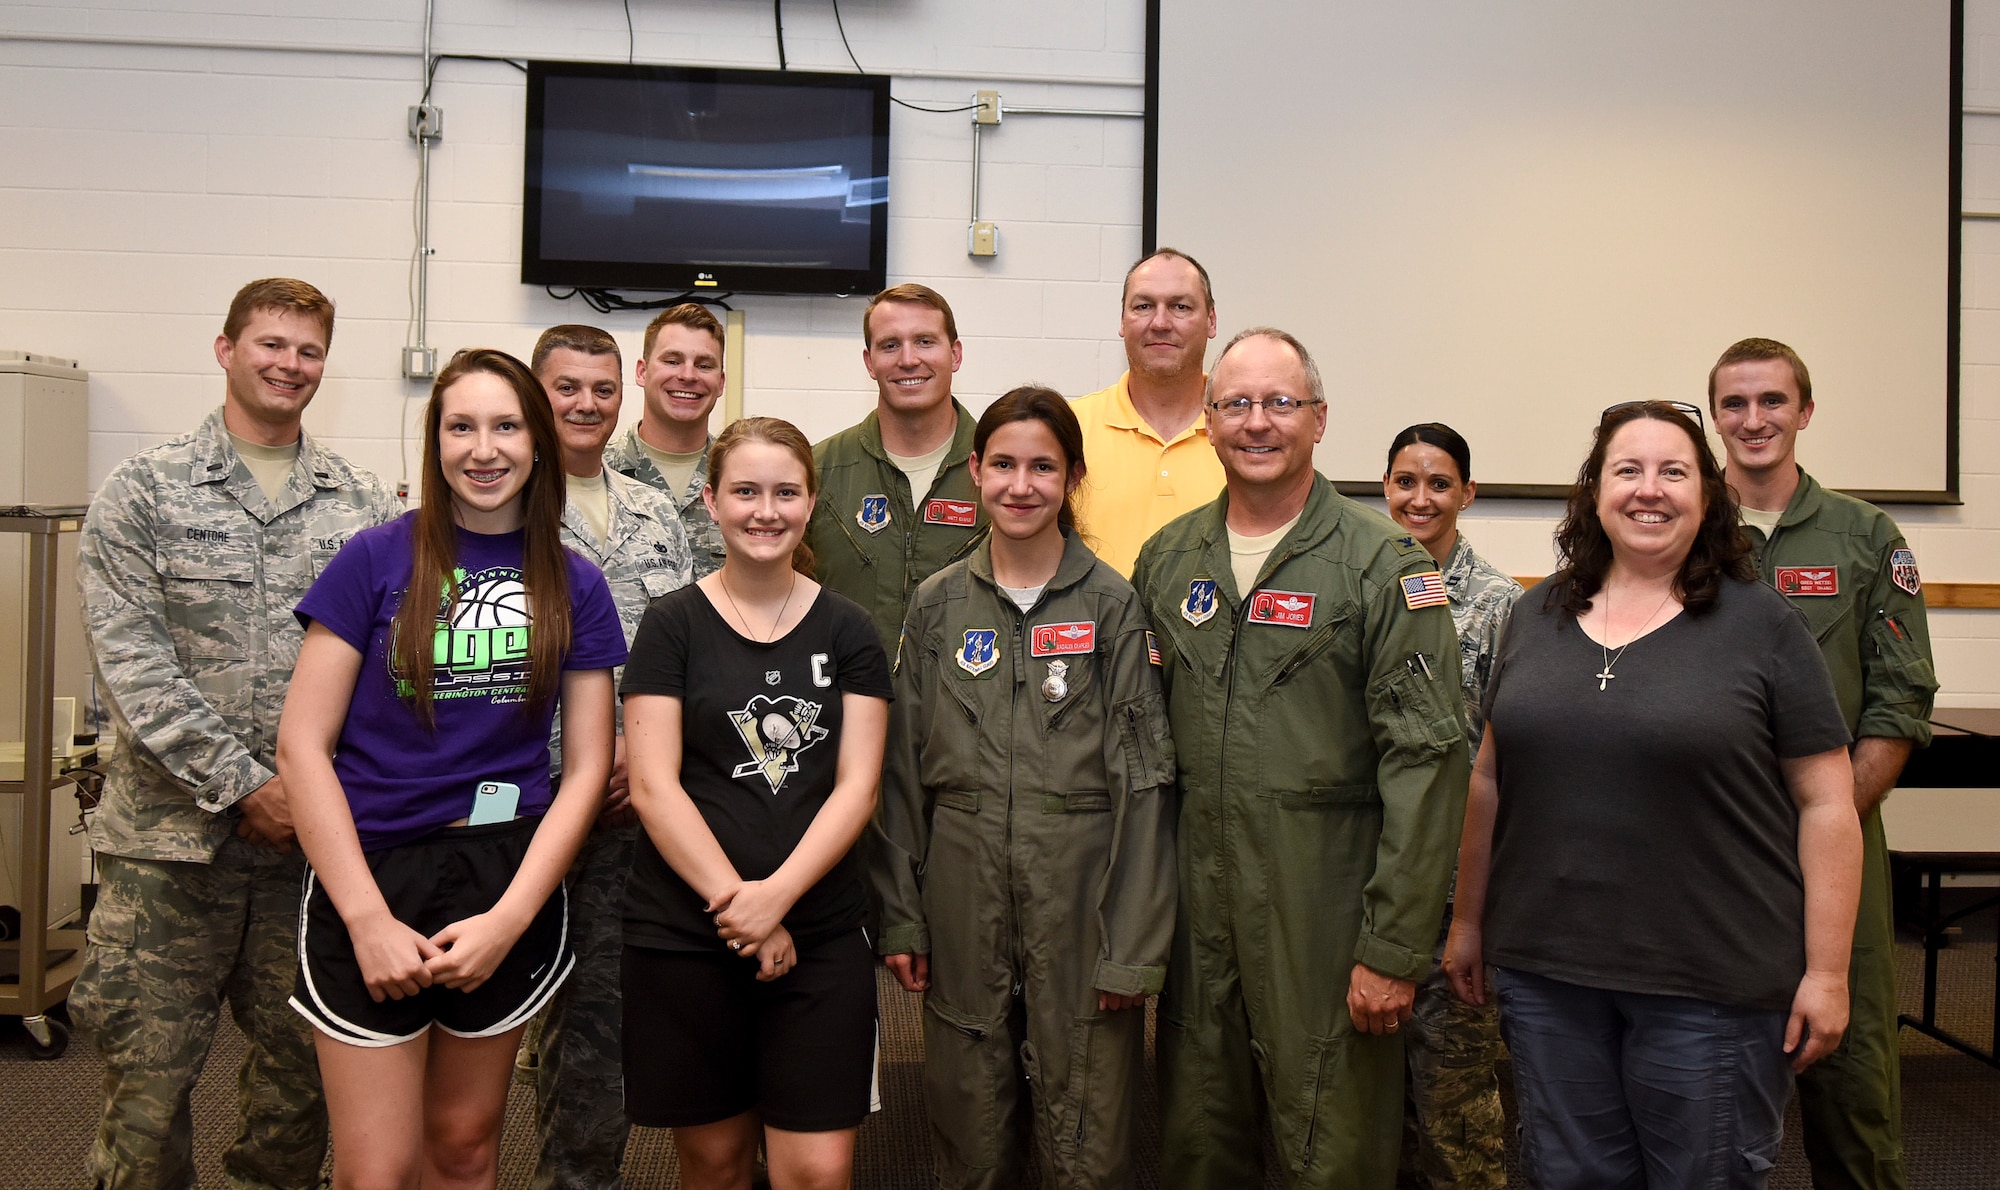 Airmen with the 121s Air Refueling Wing hosted Madalyn Charles, a 13-year-old from London, Ohio, as Pilot for the Day June 18, 2015 at Rickenbacker Air National Guard Base. Charles was diagnosed with Tricuspid Atresia, a form of congenital heart disease, after she was born and was chosen to spend the day experiencing what it woul be like to be in the Air National Guard. (U.S. Air National Guard photo by Airman Ashley Williams/Released)